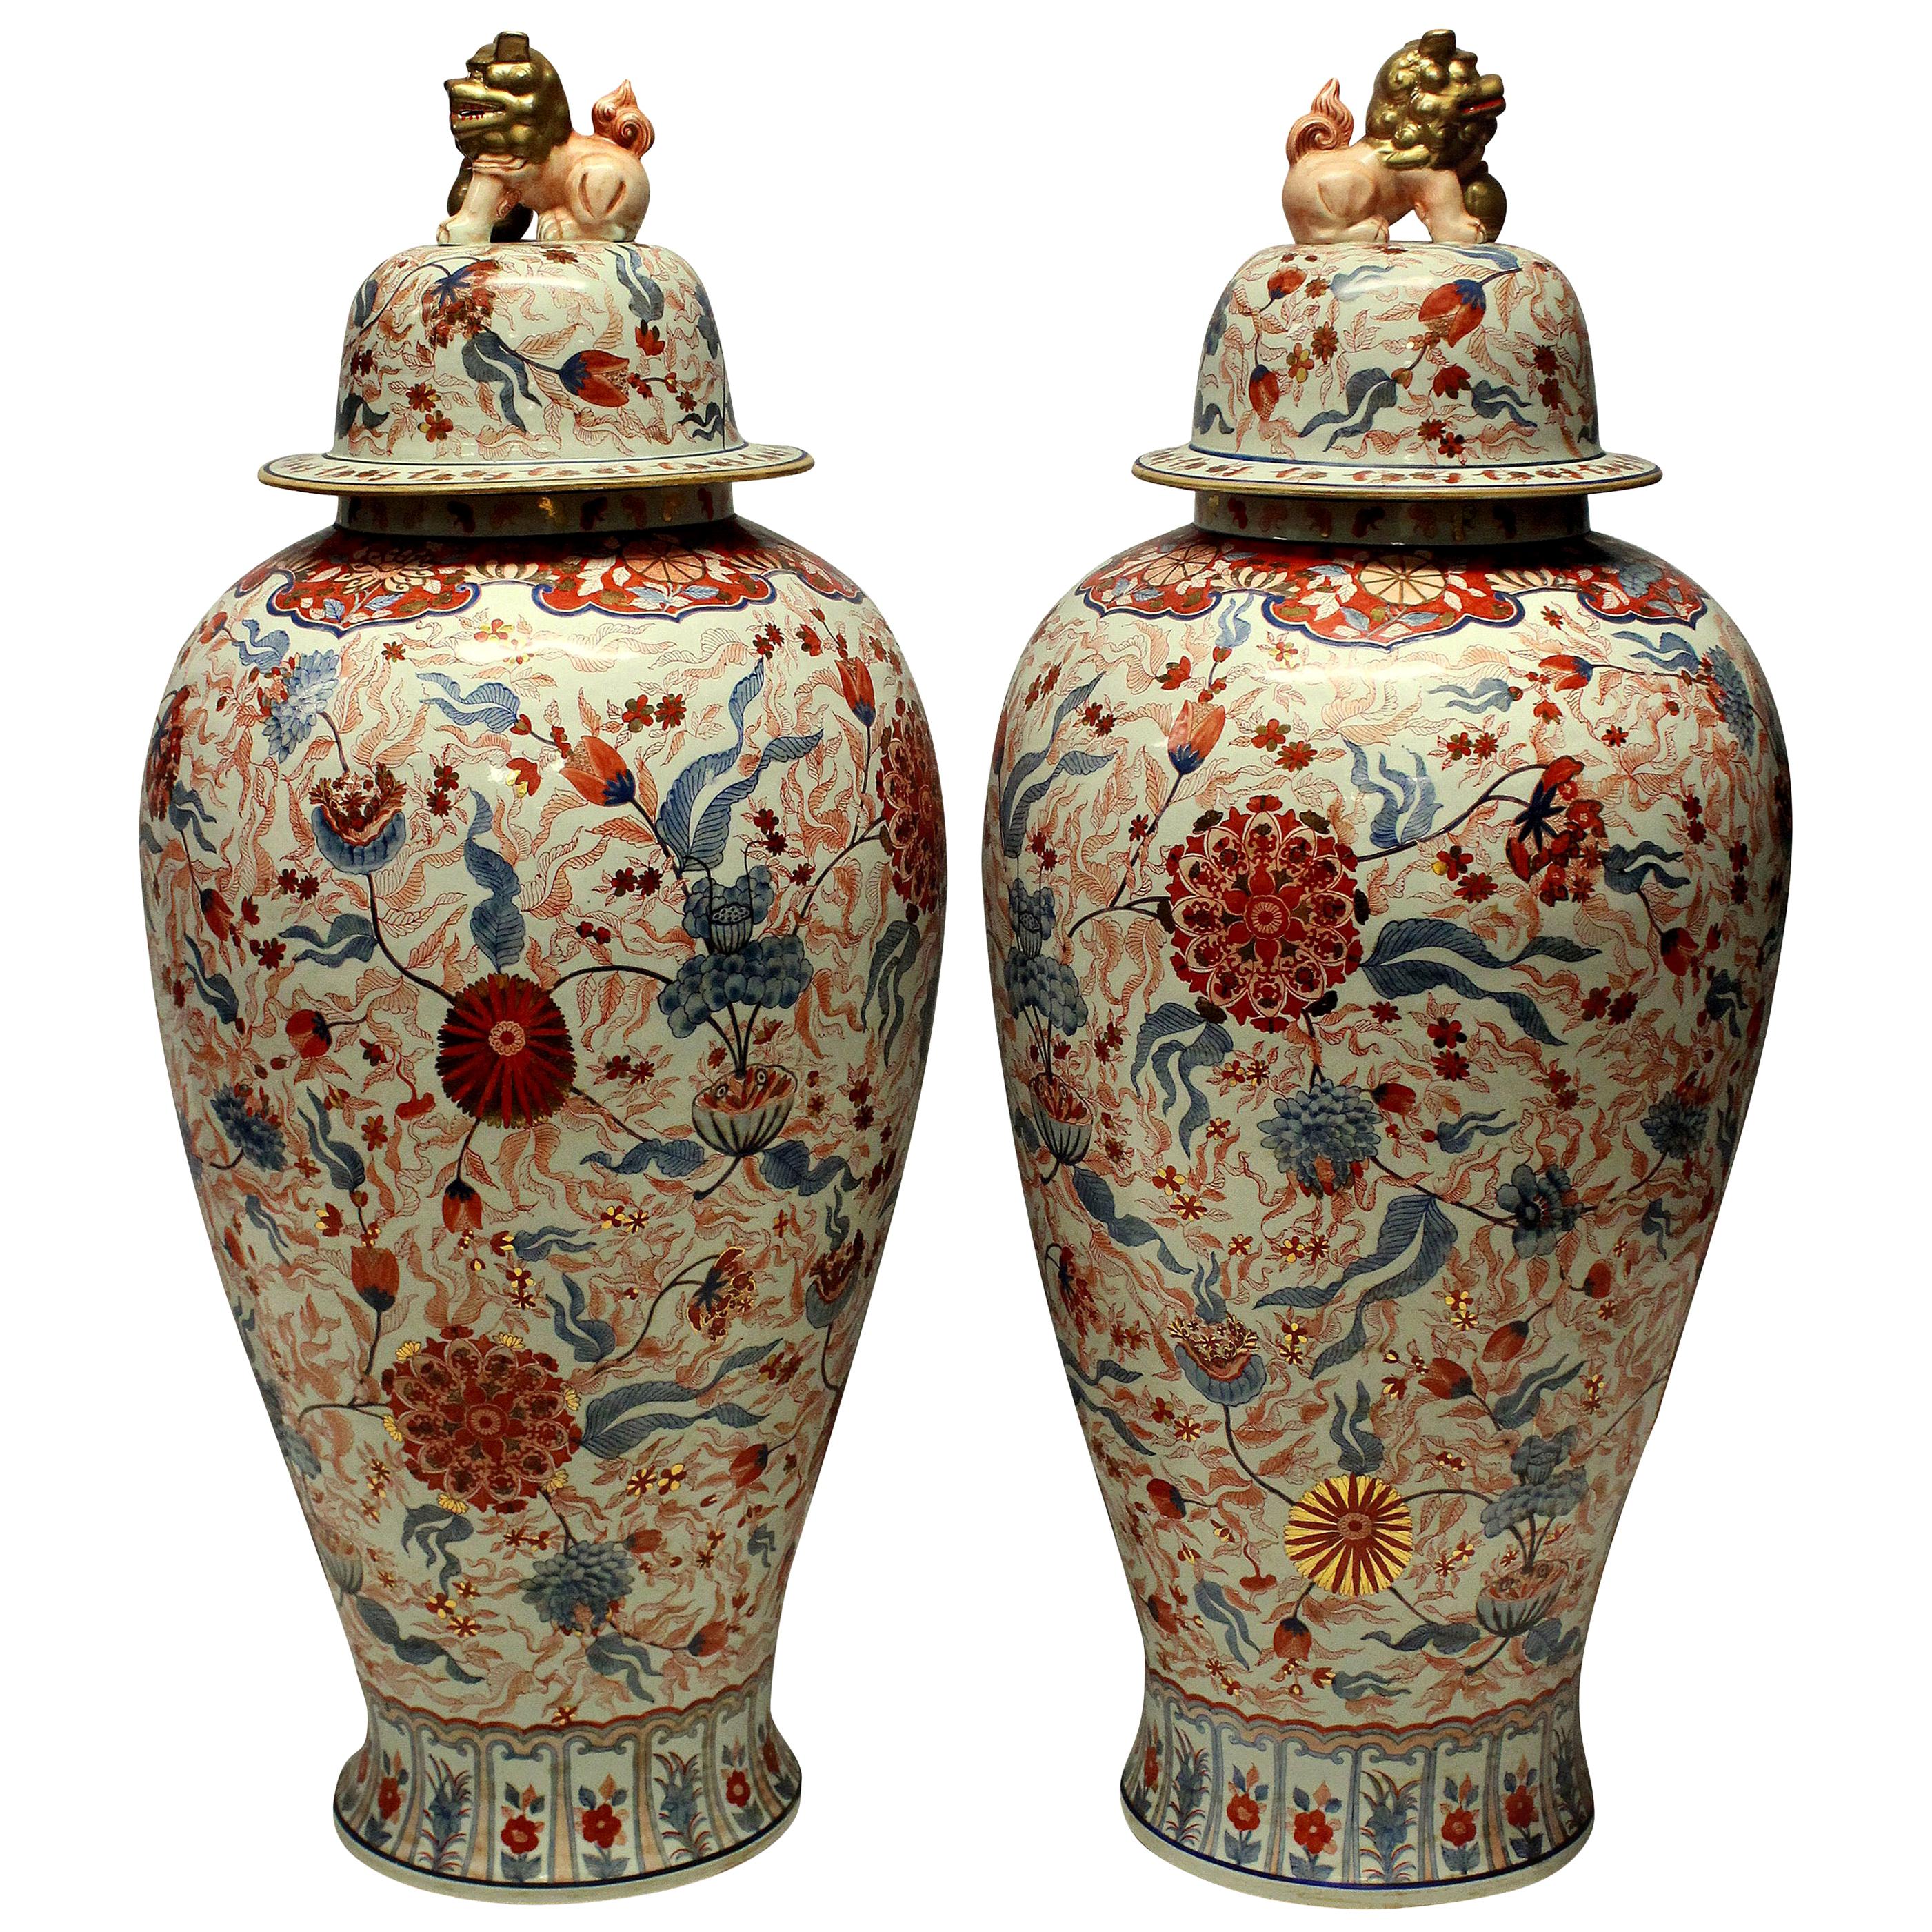 Large and Impressive Pair of Imari Floor Vases with Covers